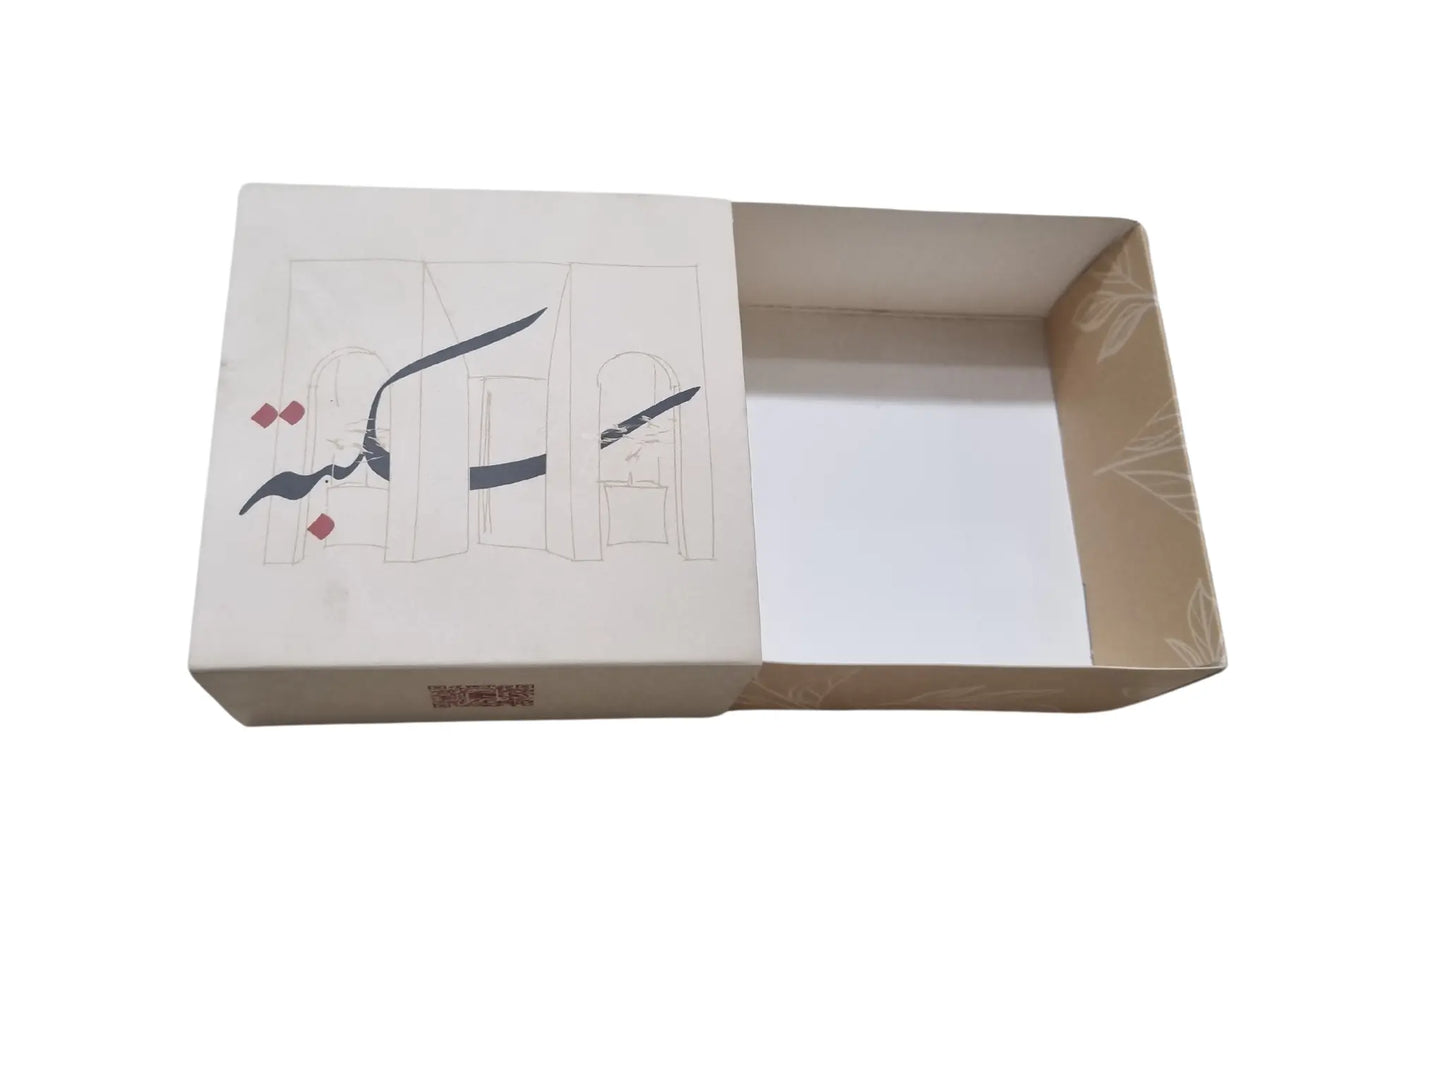 custom printed pullout box 10×10×5.25 cm with out lamination custom printed pullout box 10×10×5.25 cm with out lamination مطبعة مدار Madar Print